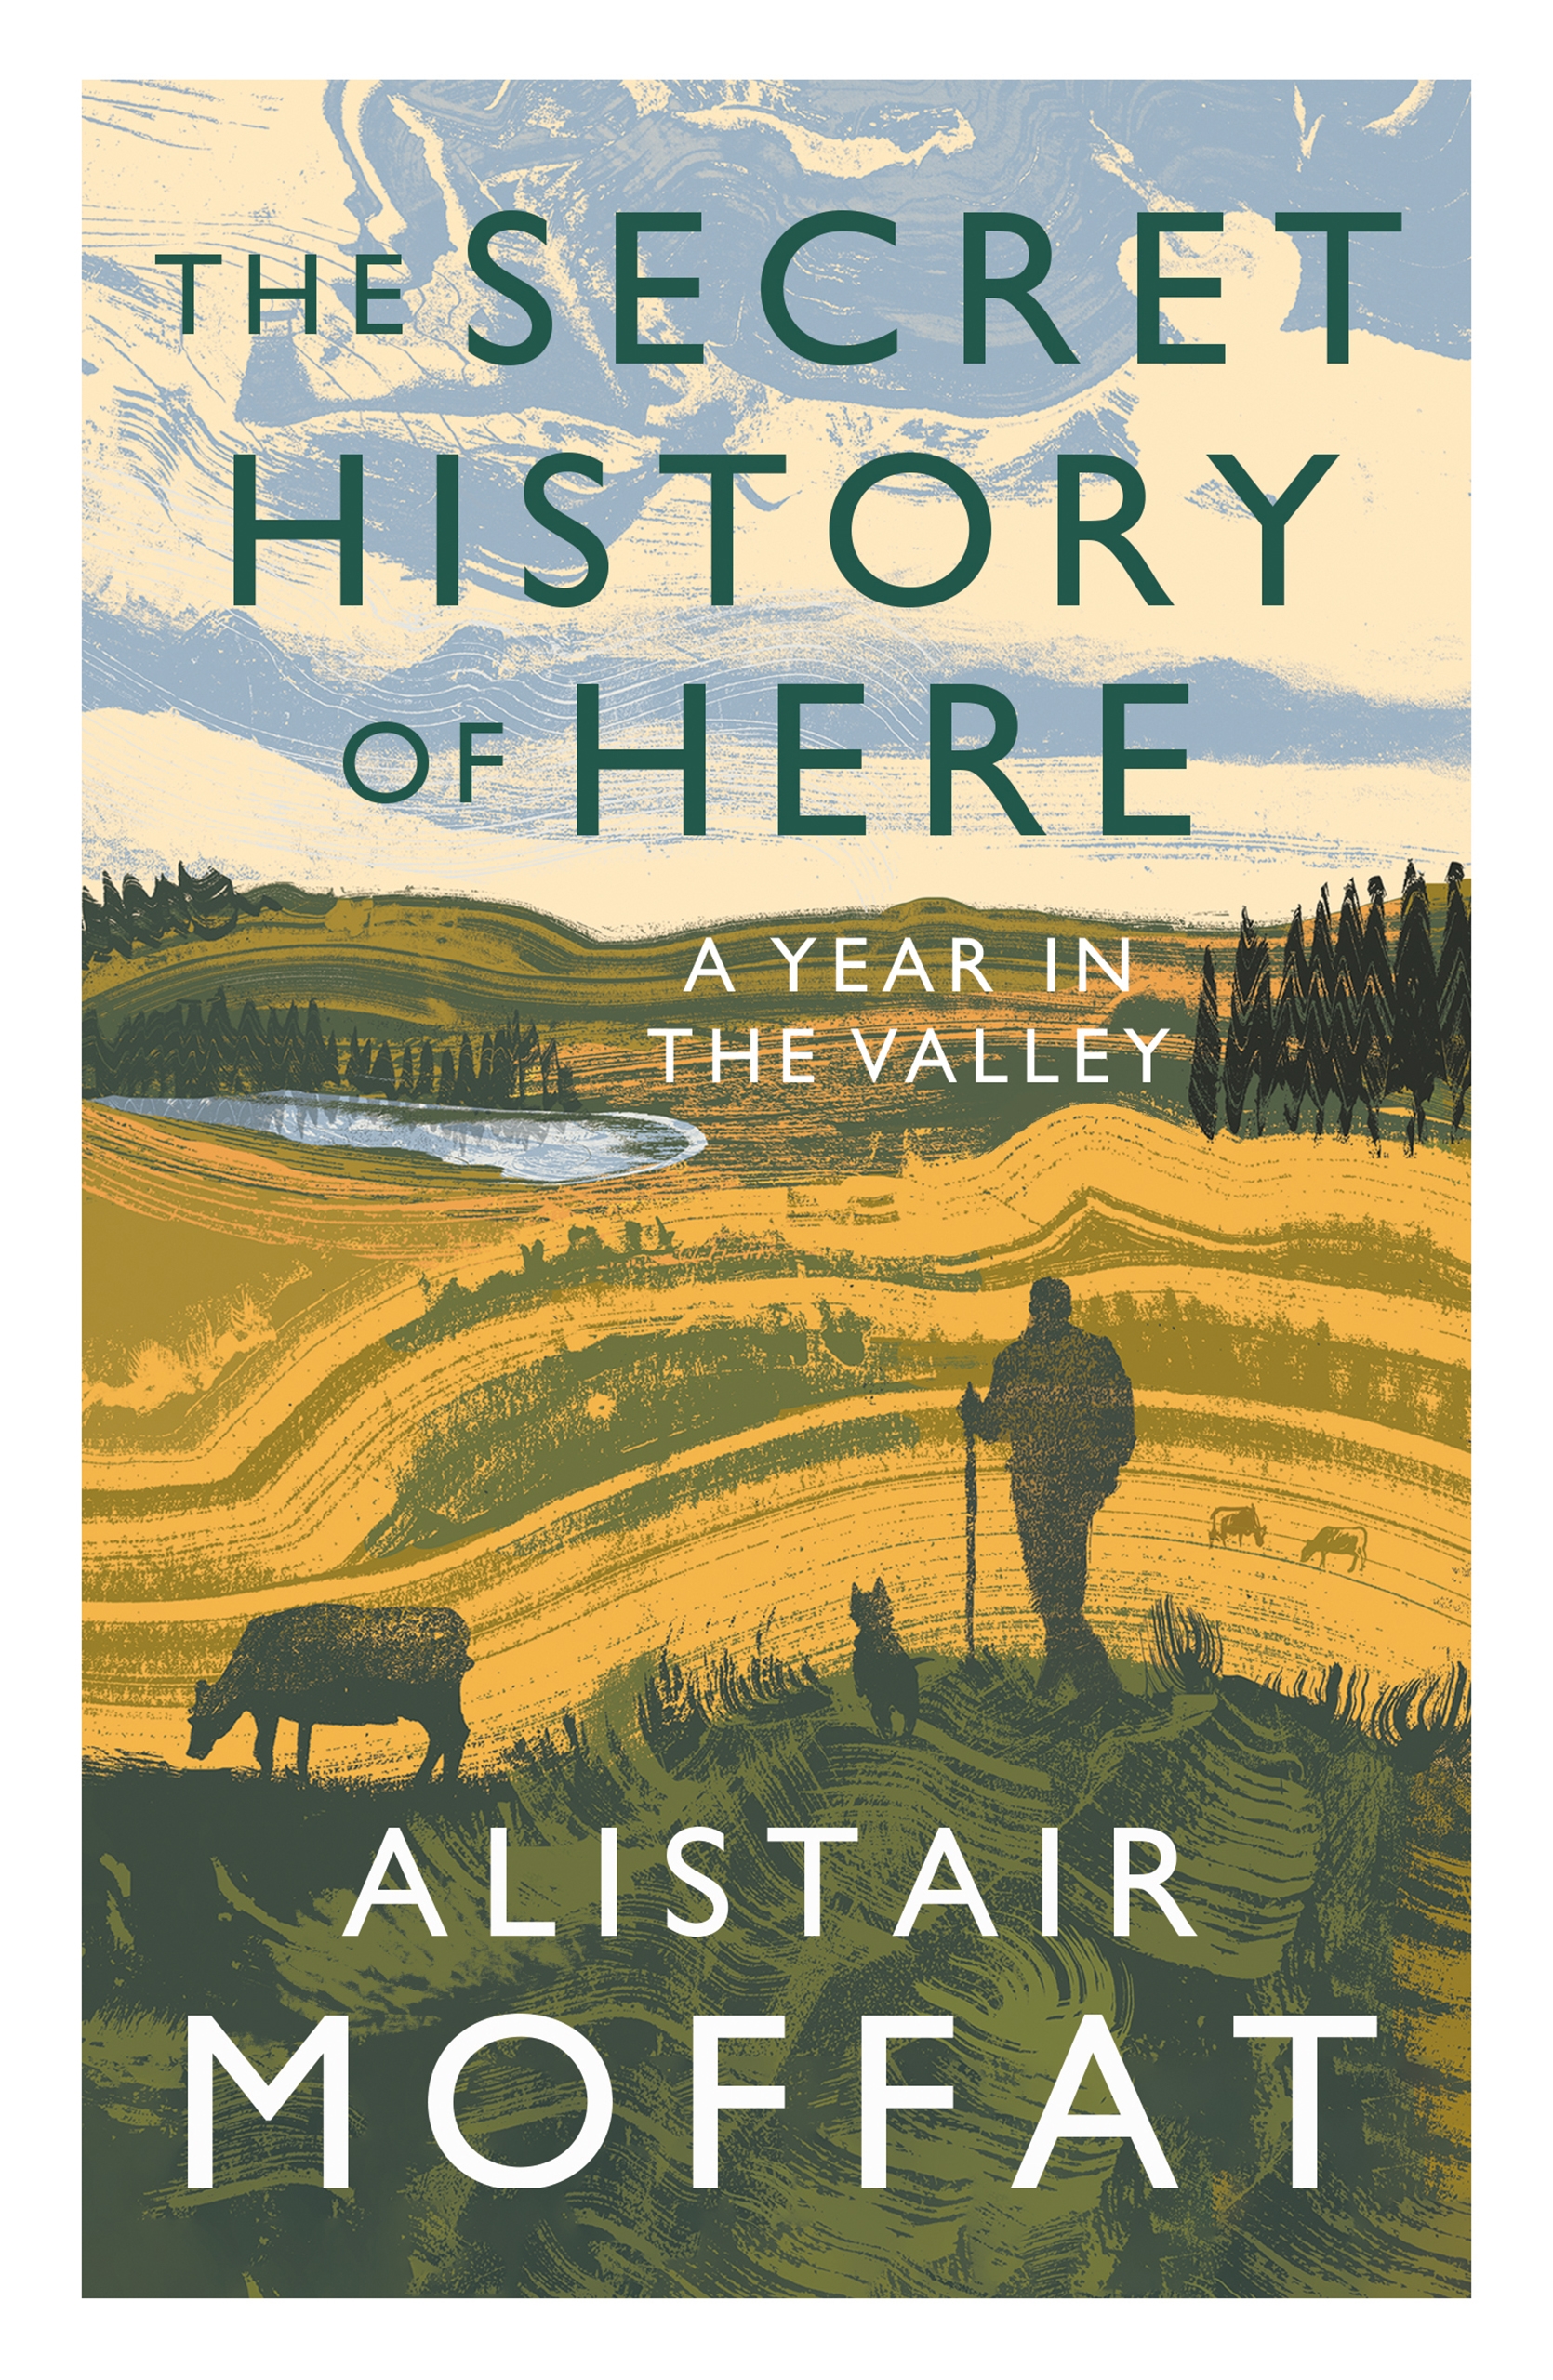 The Secret History of Here - A Year in the Valley by Alistair